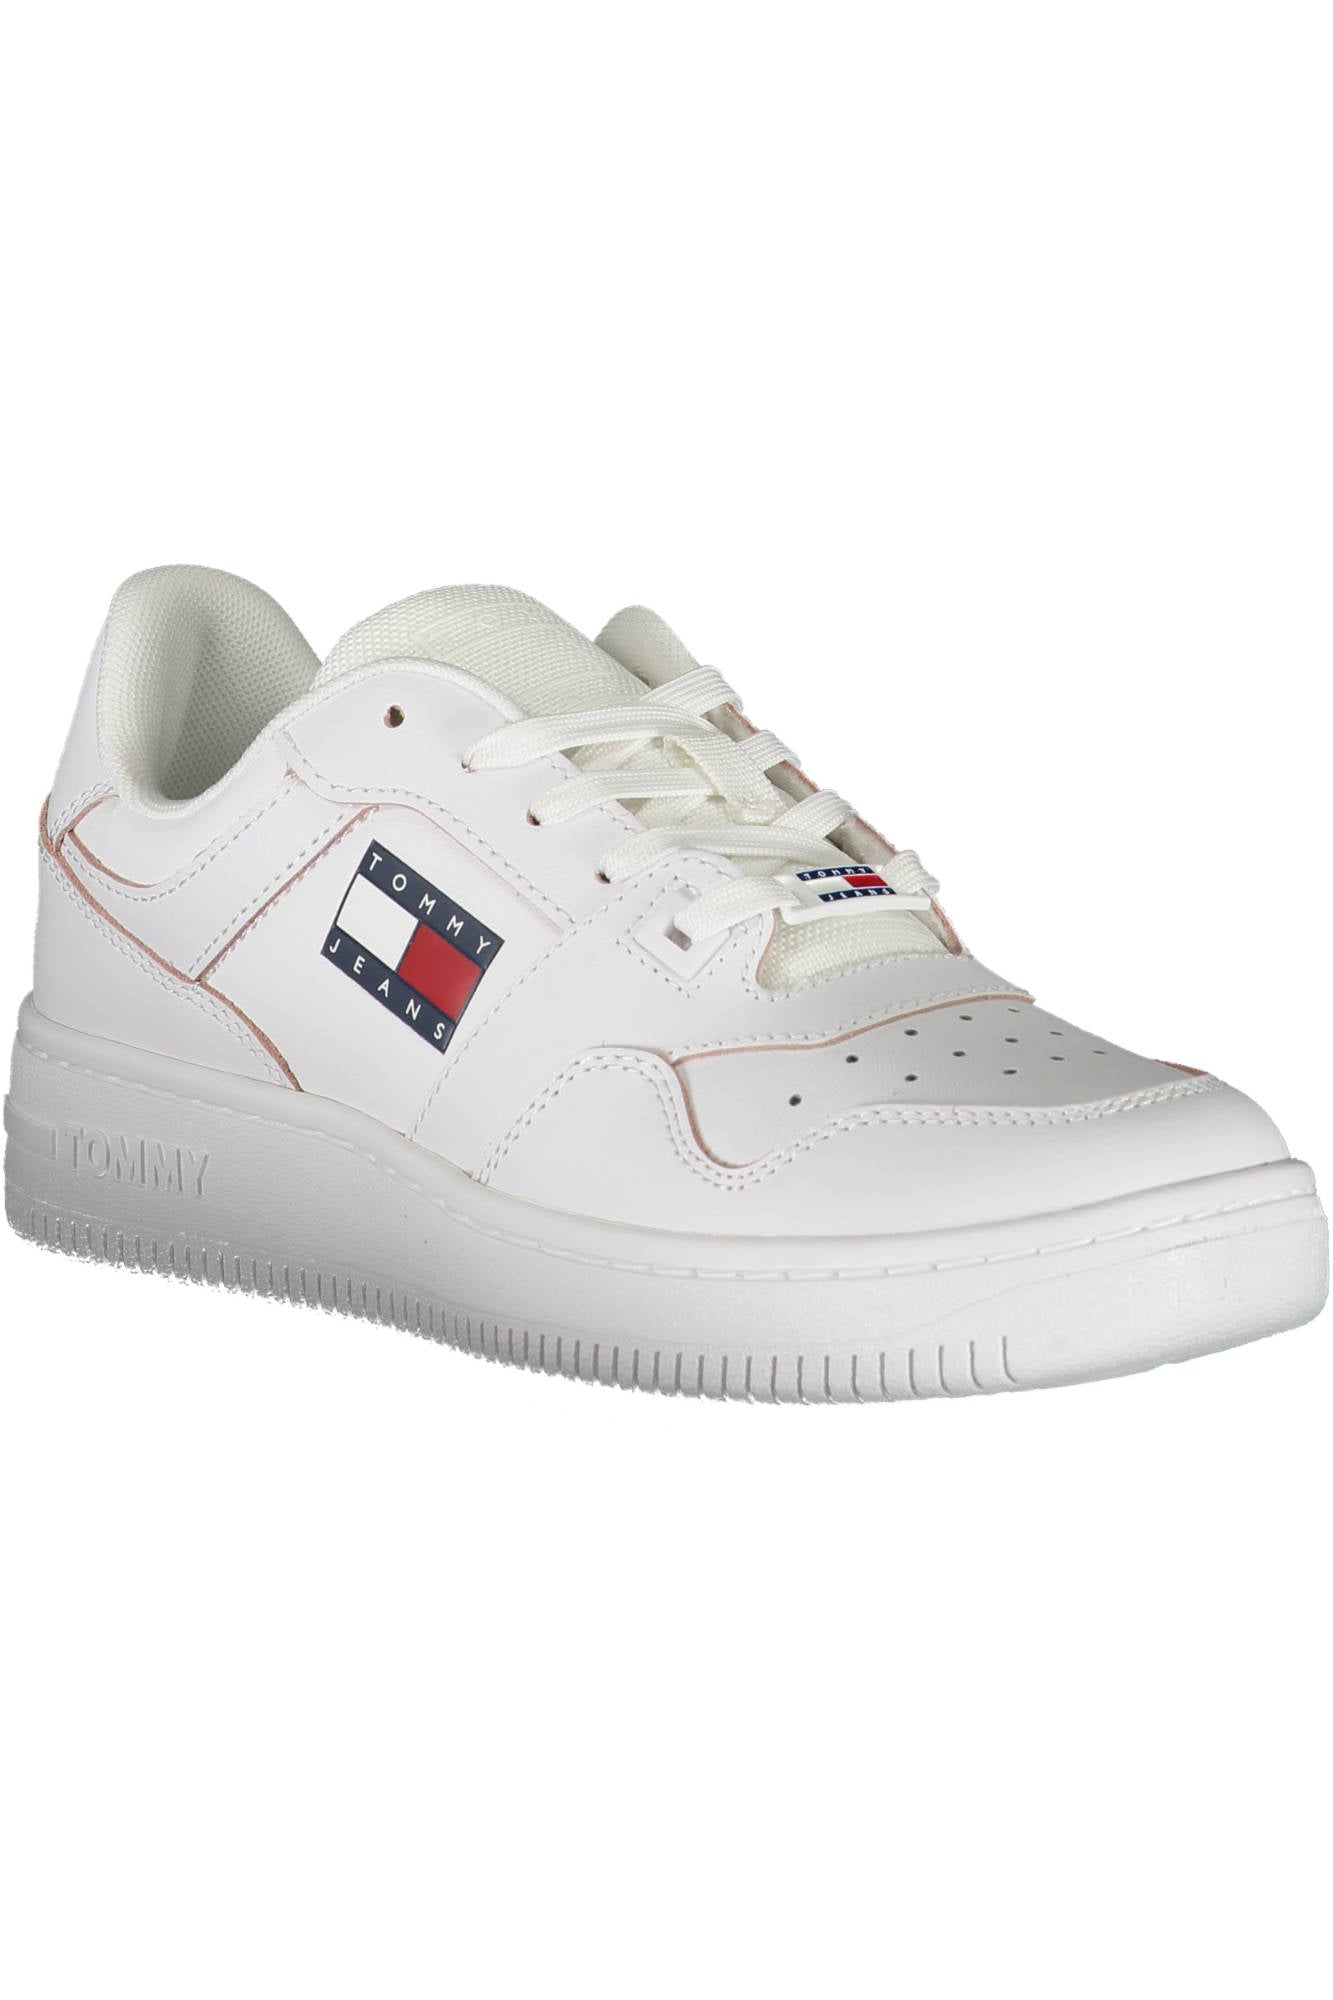 TOMMY HILFIGER WOMEN'S WHITE SPORTS SHOES-Shoes - Men-TOMMY HILFIGER-Urbanheer